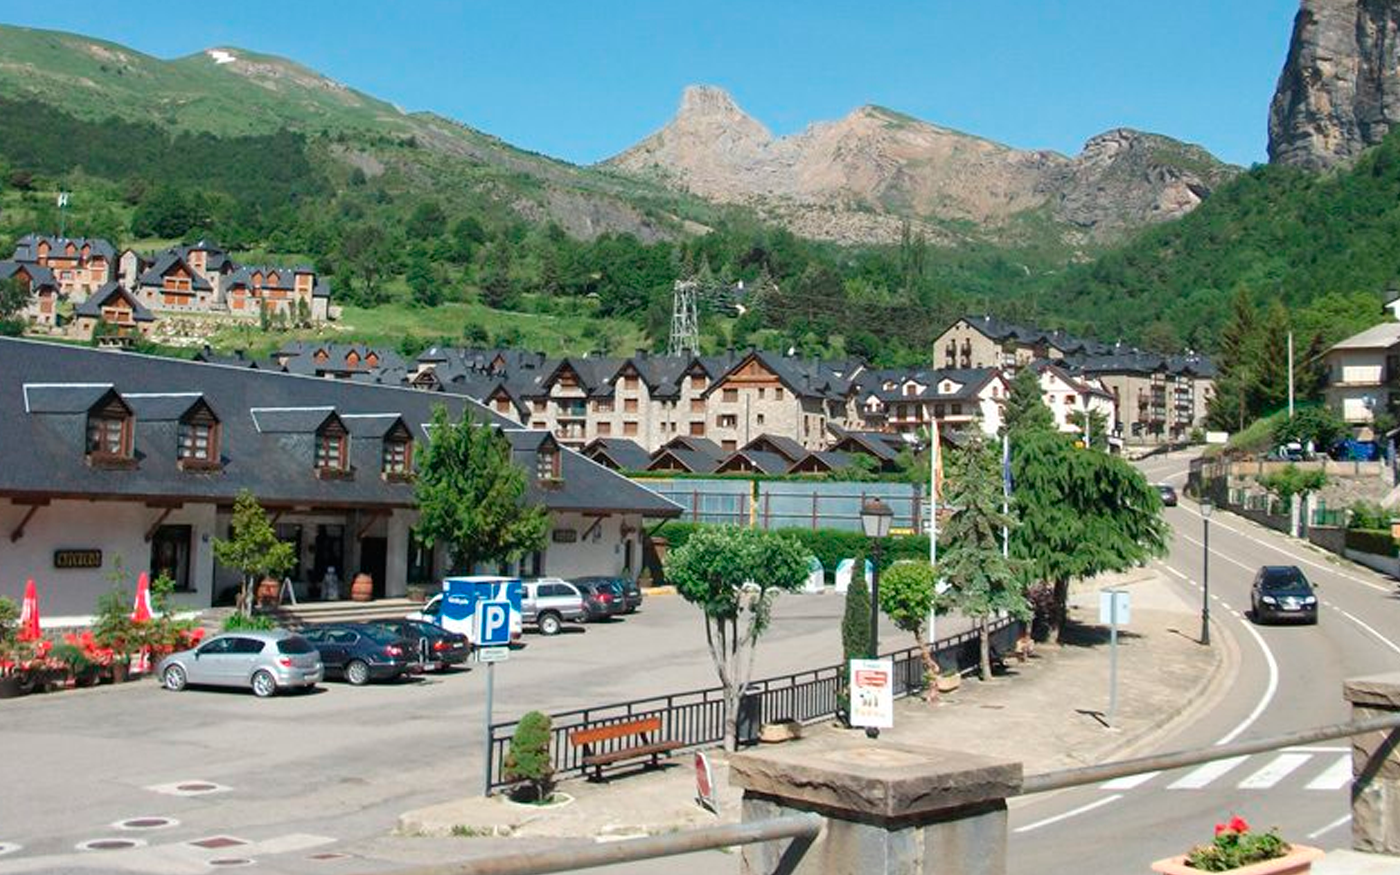 Discovering the Charm of Escarrilla: An Unforgettable Experience in the Tena Valley, Huesca